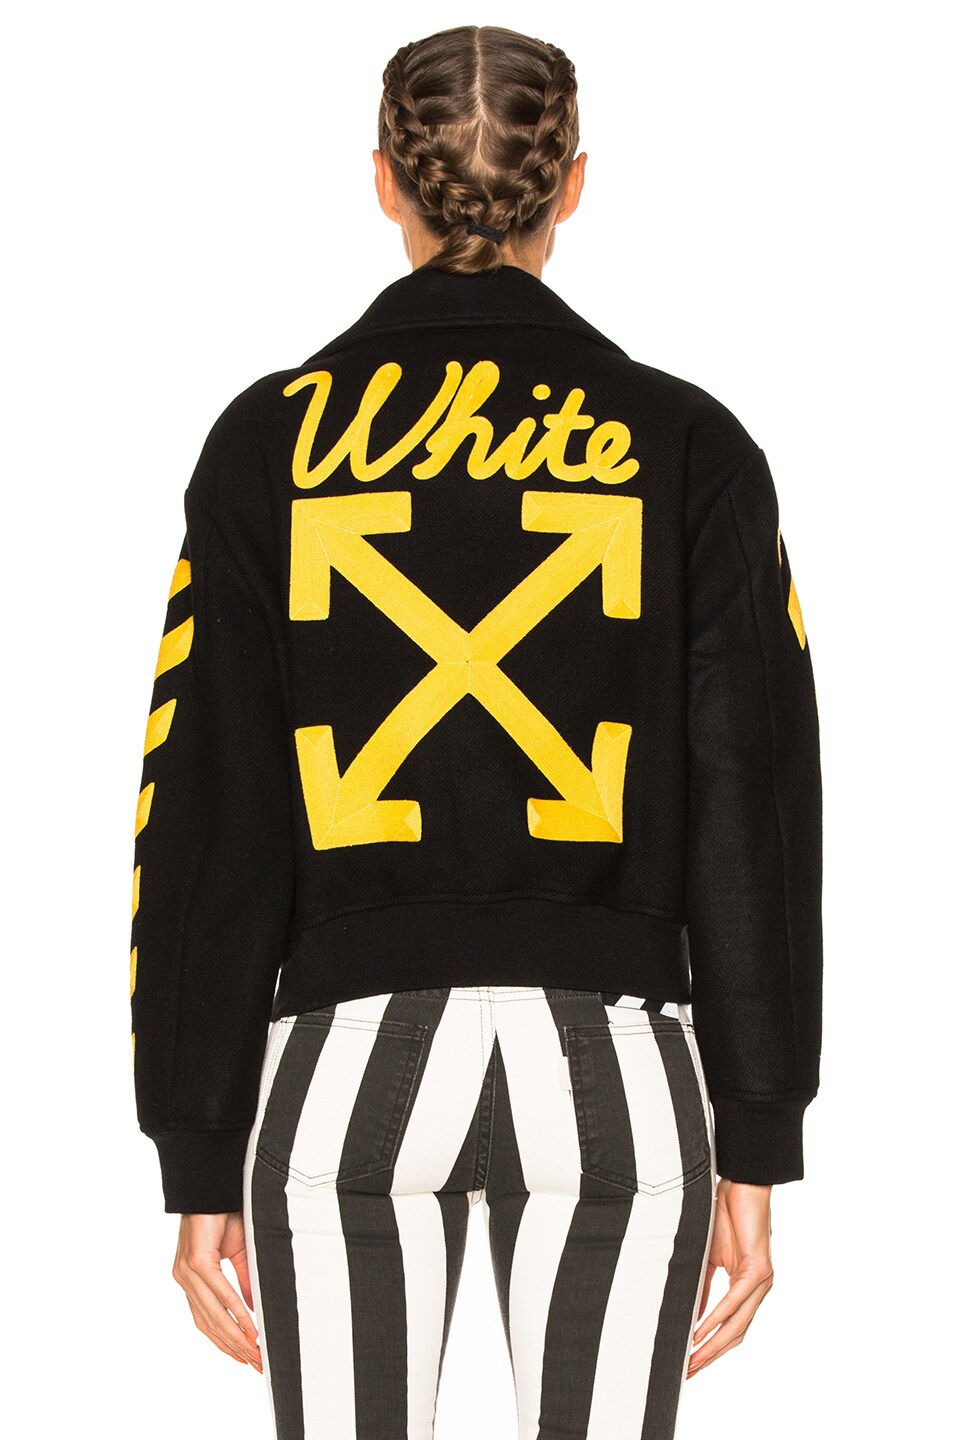 OFF-WHITE Varsity Bomber Jacket with Patches in Black & Yellow | FWRD